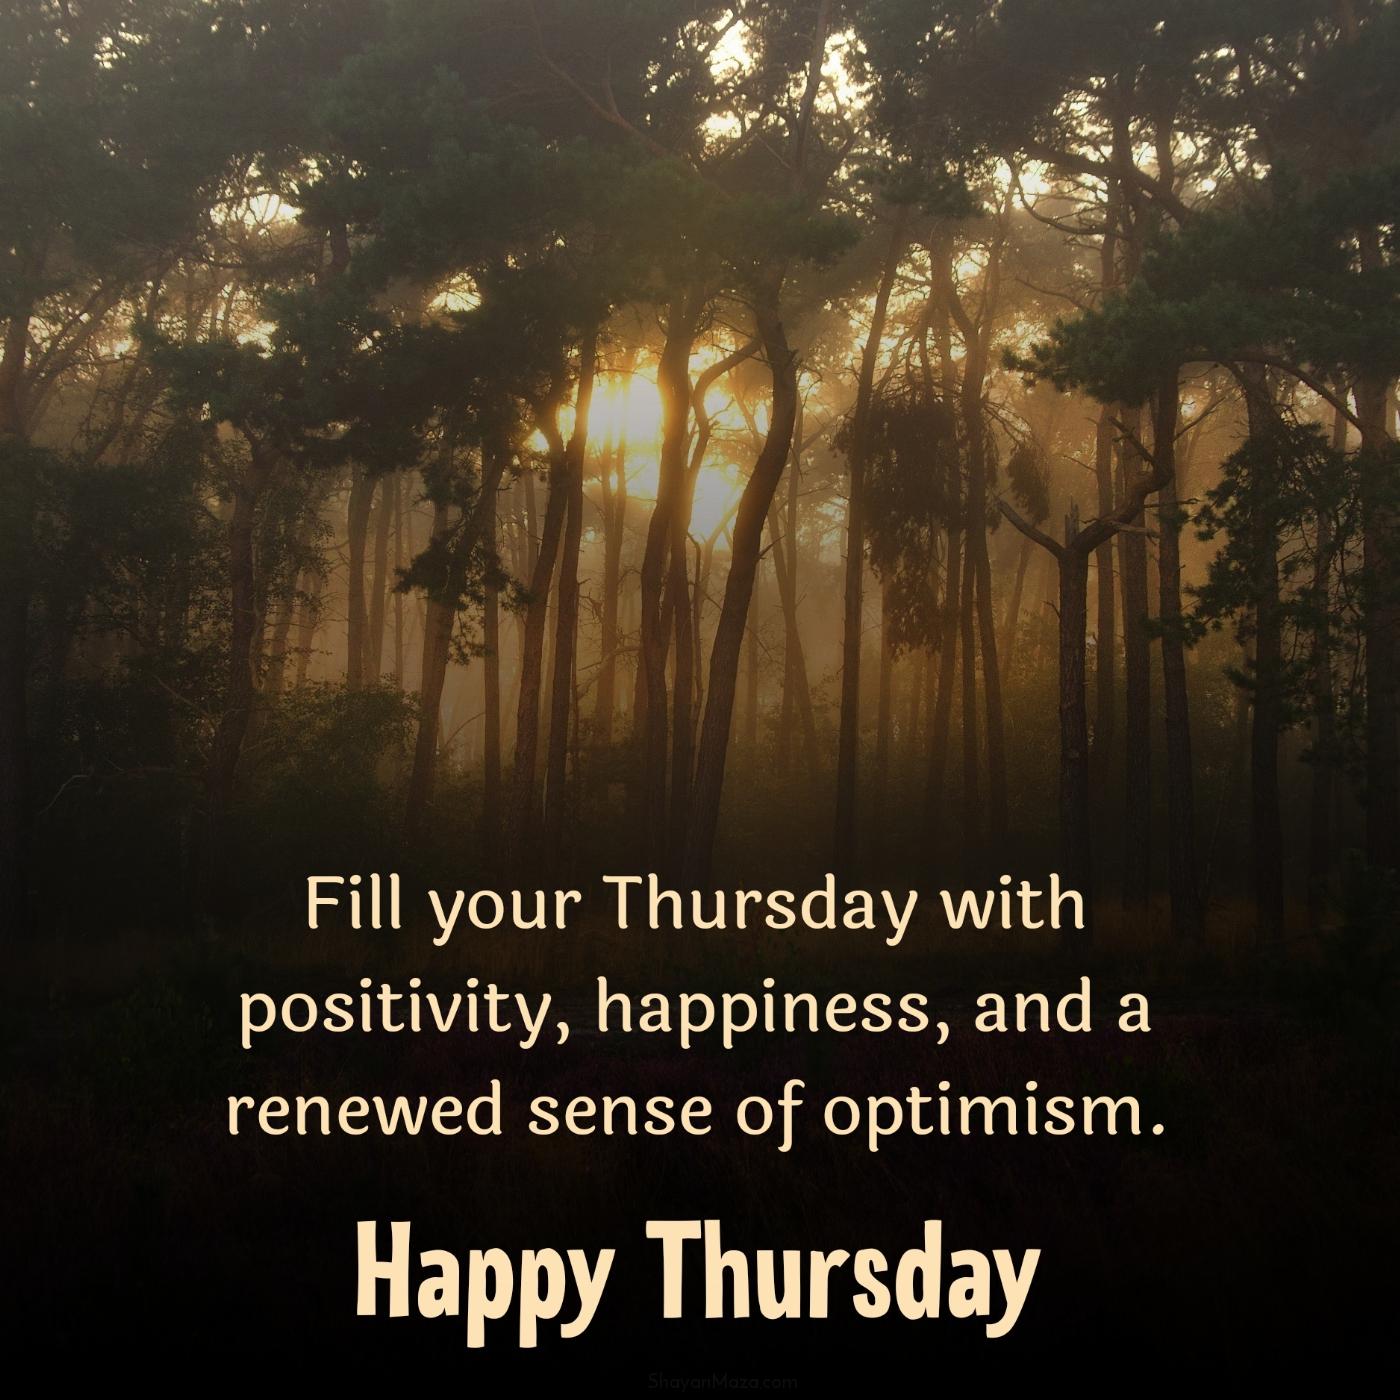 Fill your Thursday with positivity happiness and a renewed sense